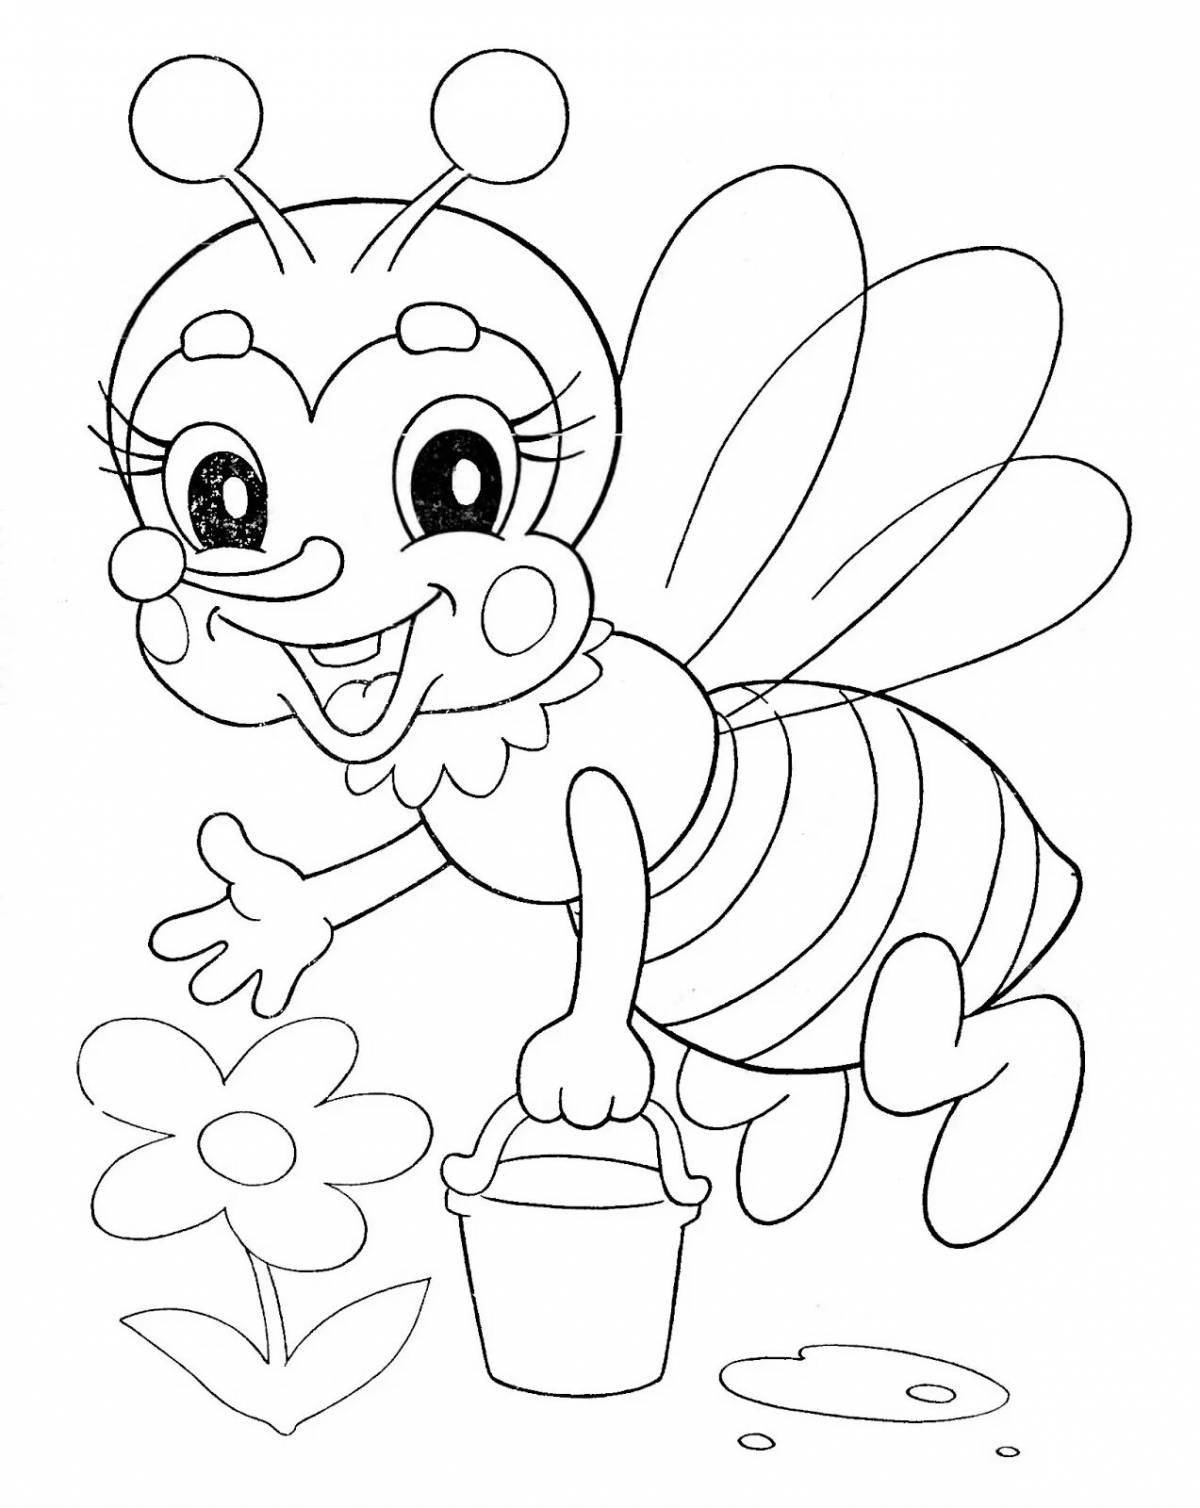 Bee for children 6 7 years old #6